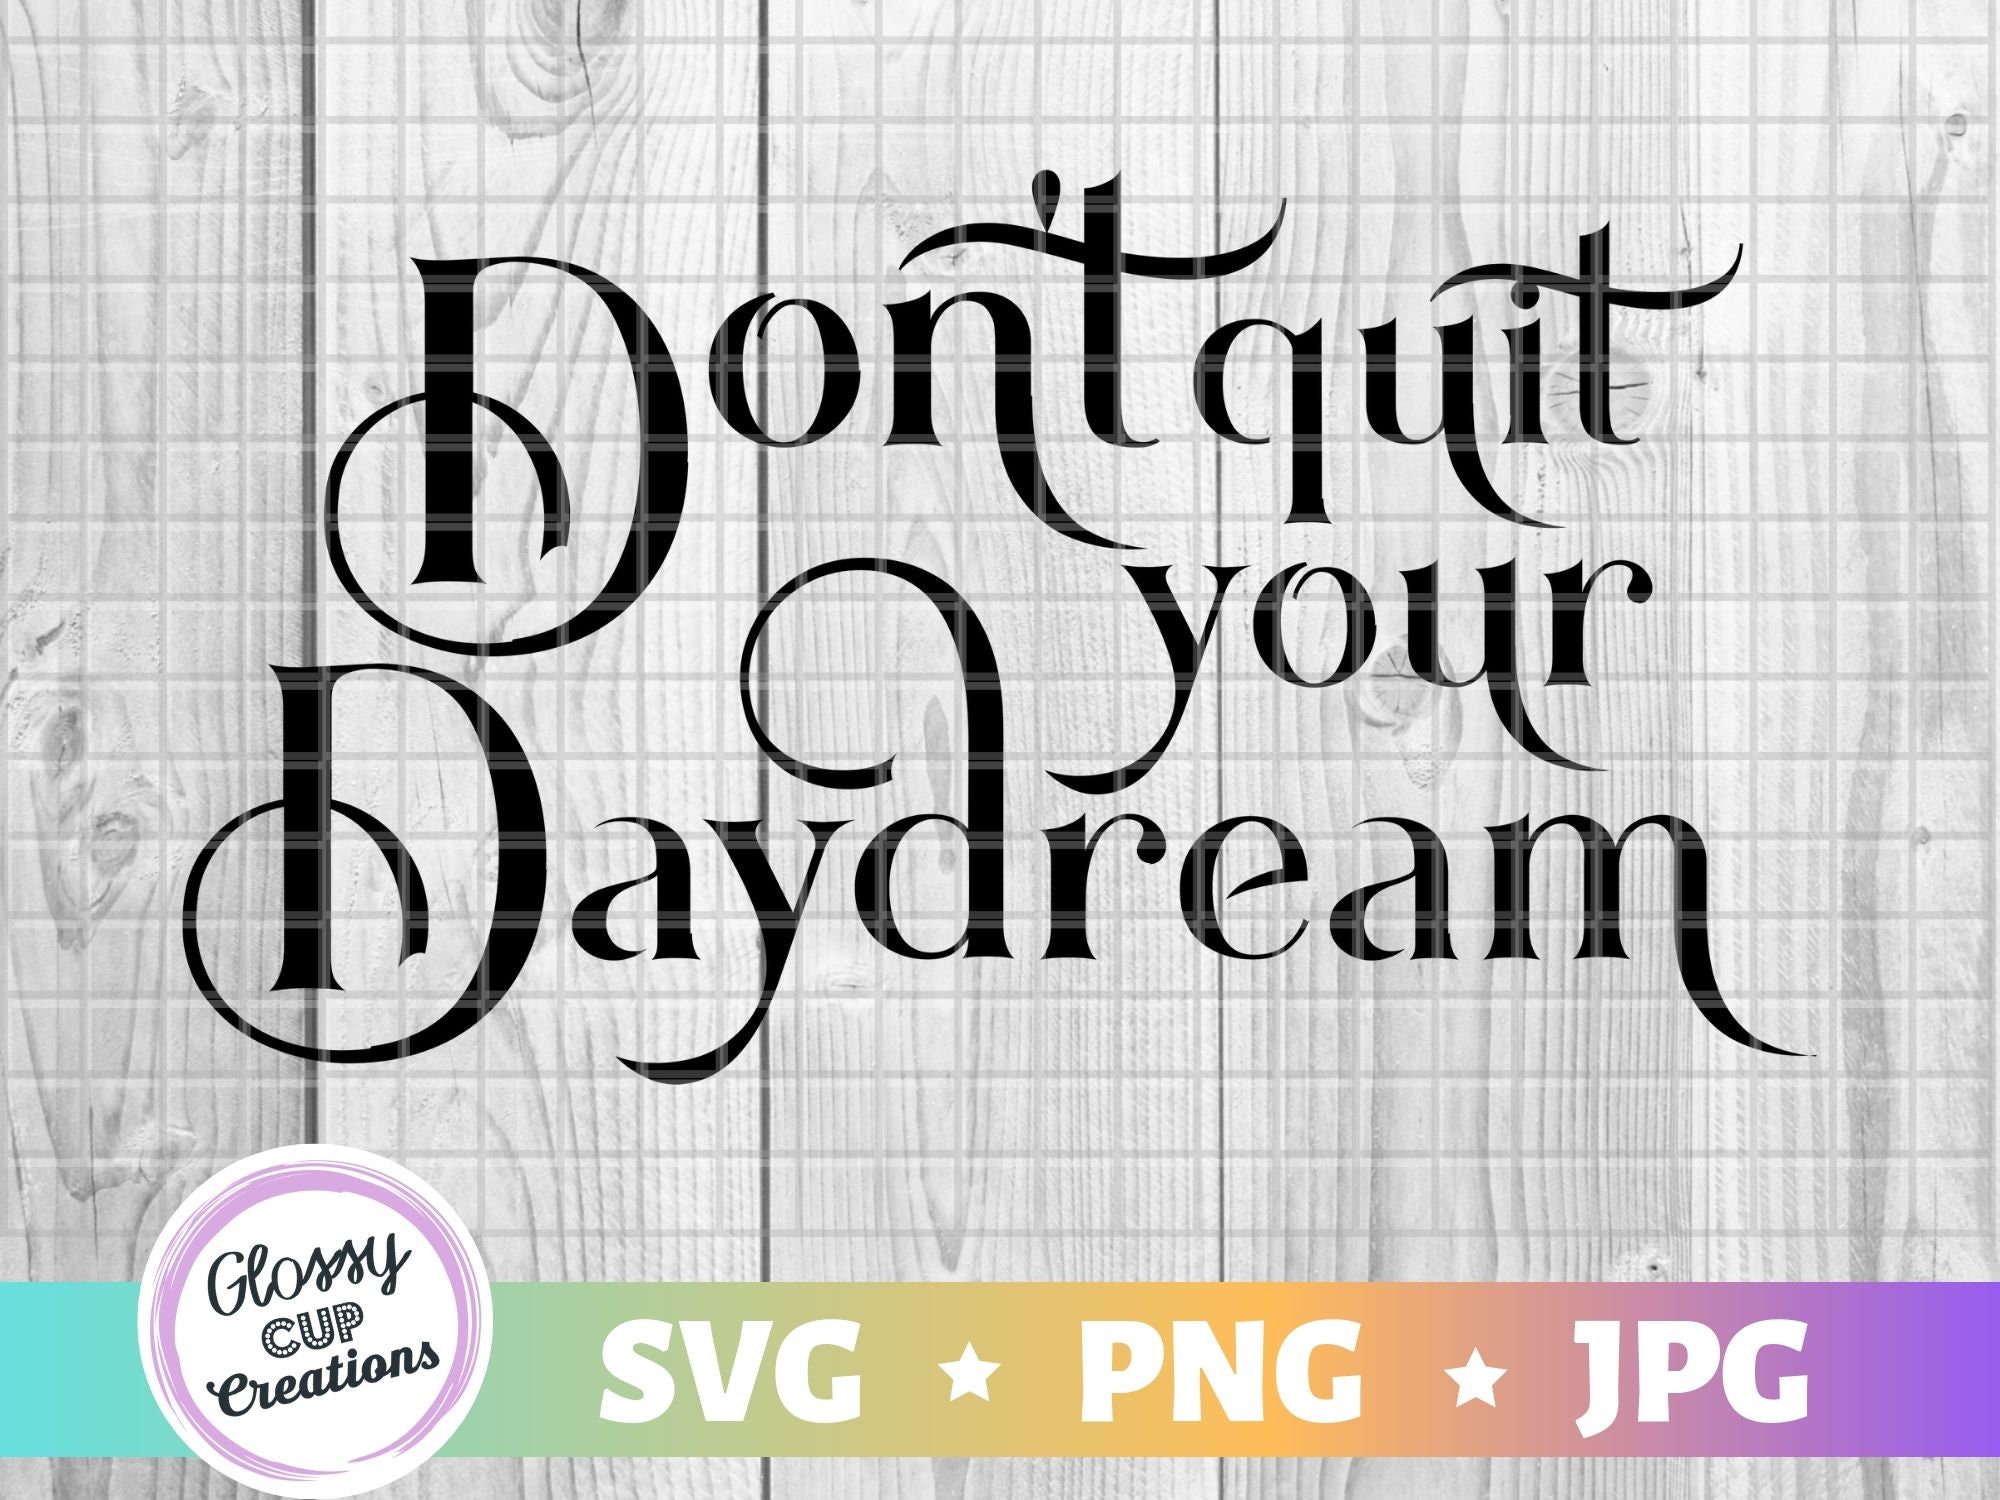 Don't Quit Your Daydream Sign Wall Art Digital Instant Download includes Cricut SVG Cut File JPEG Printable Image PNG Transparent File